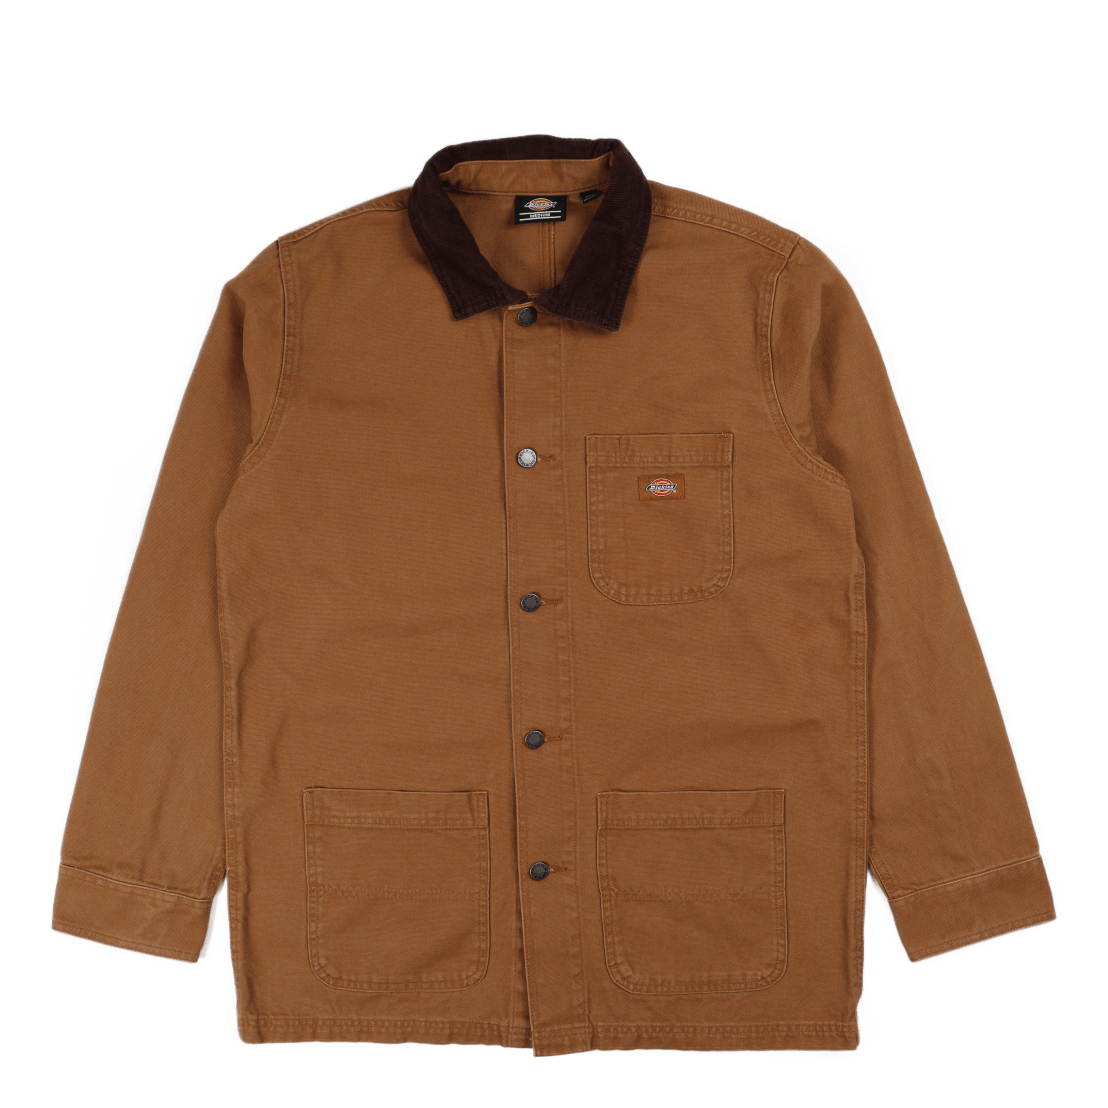 Duck Lined Chore Jacket Stone Washed Brown Duck